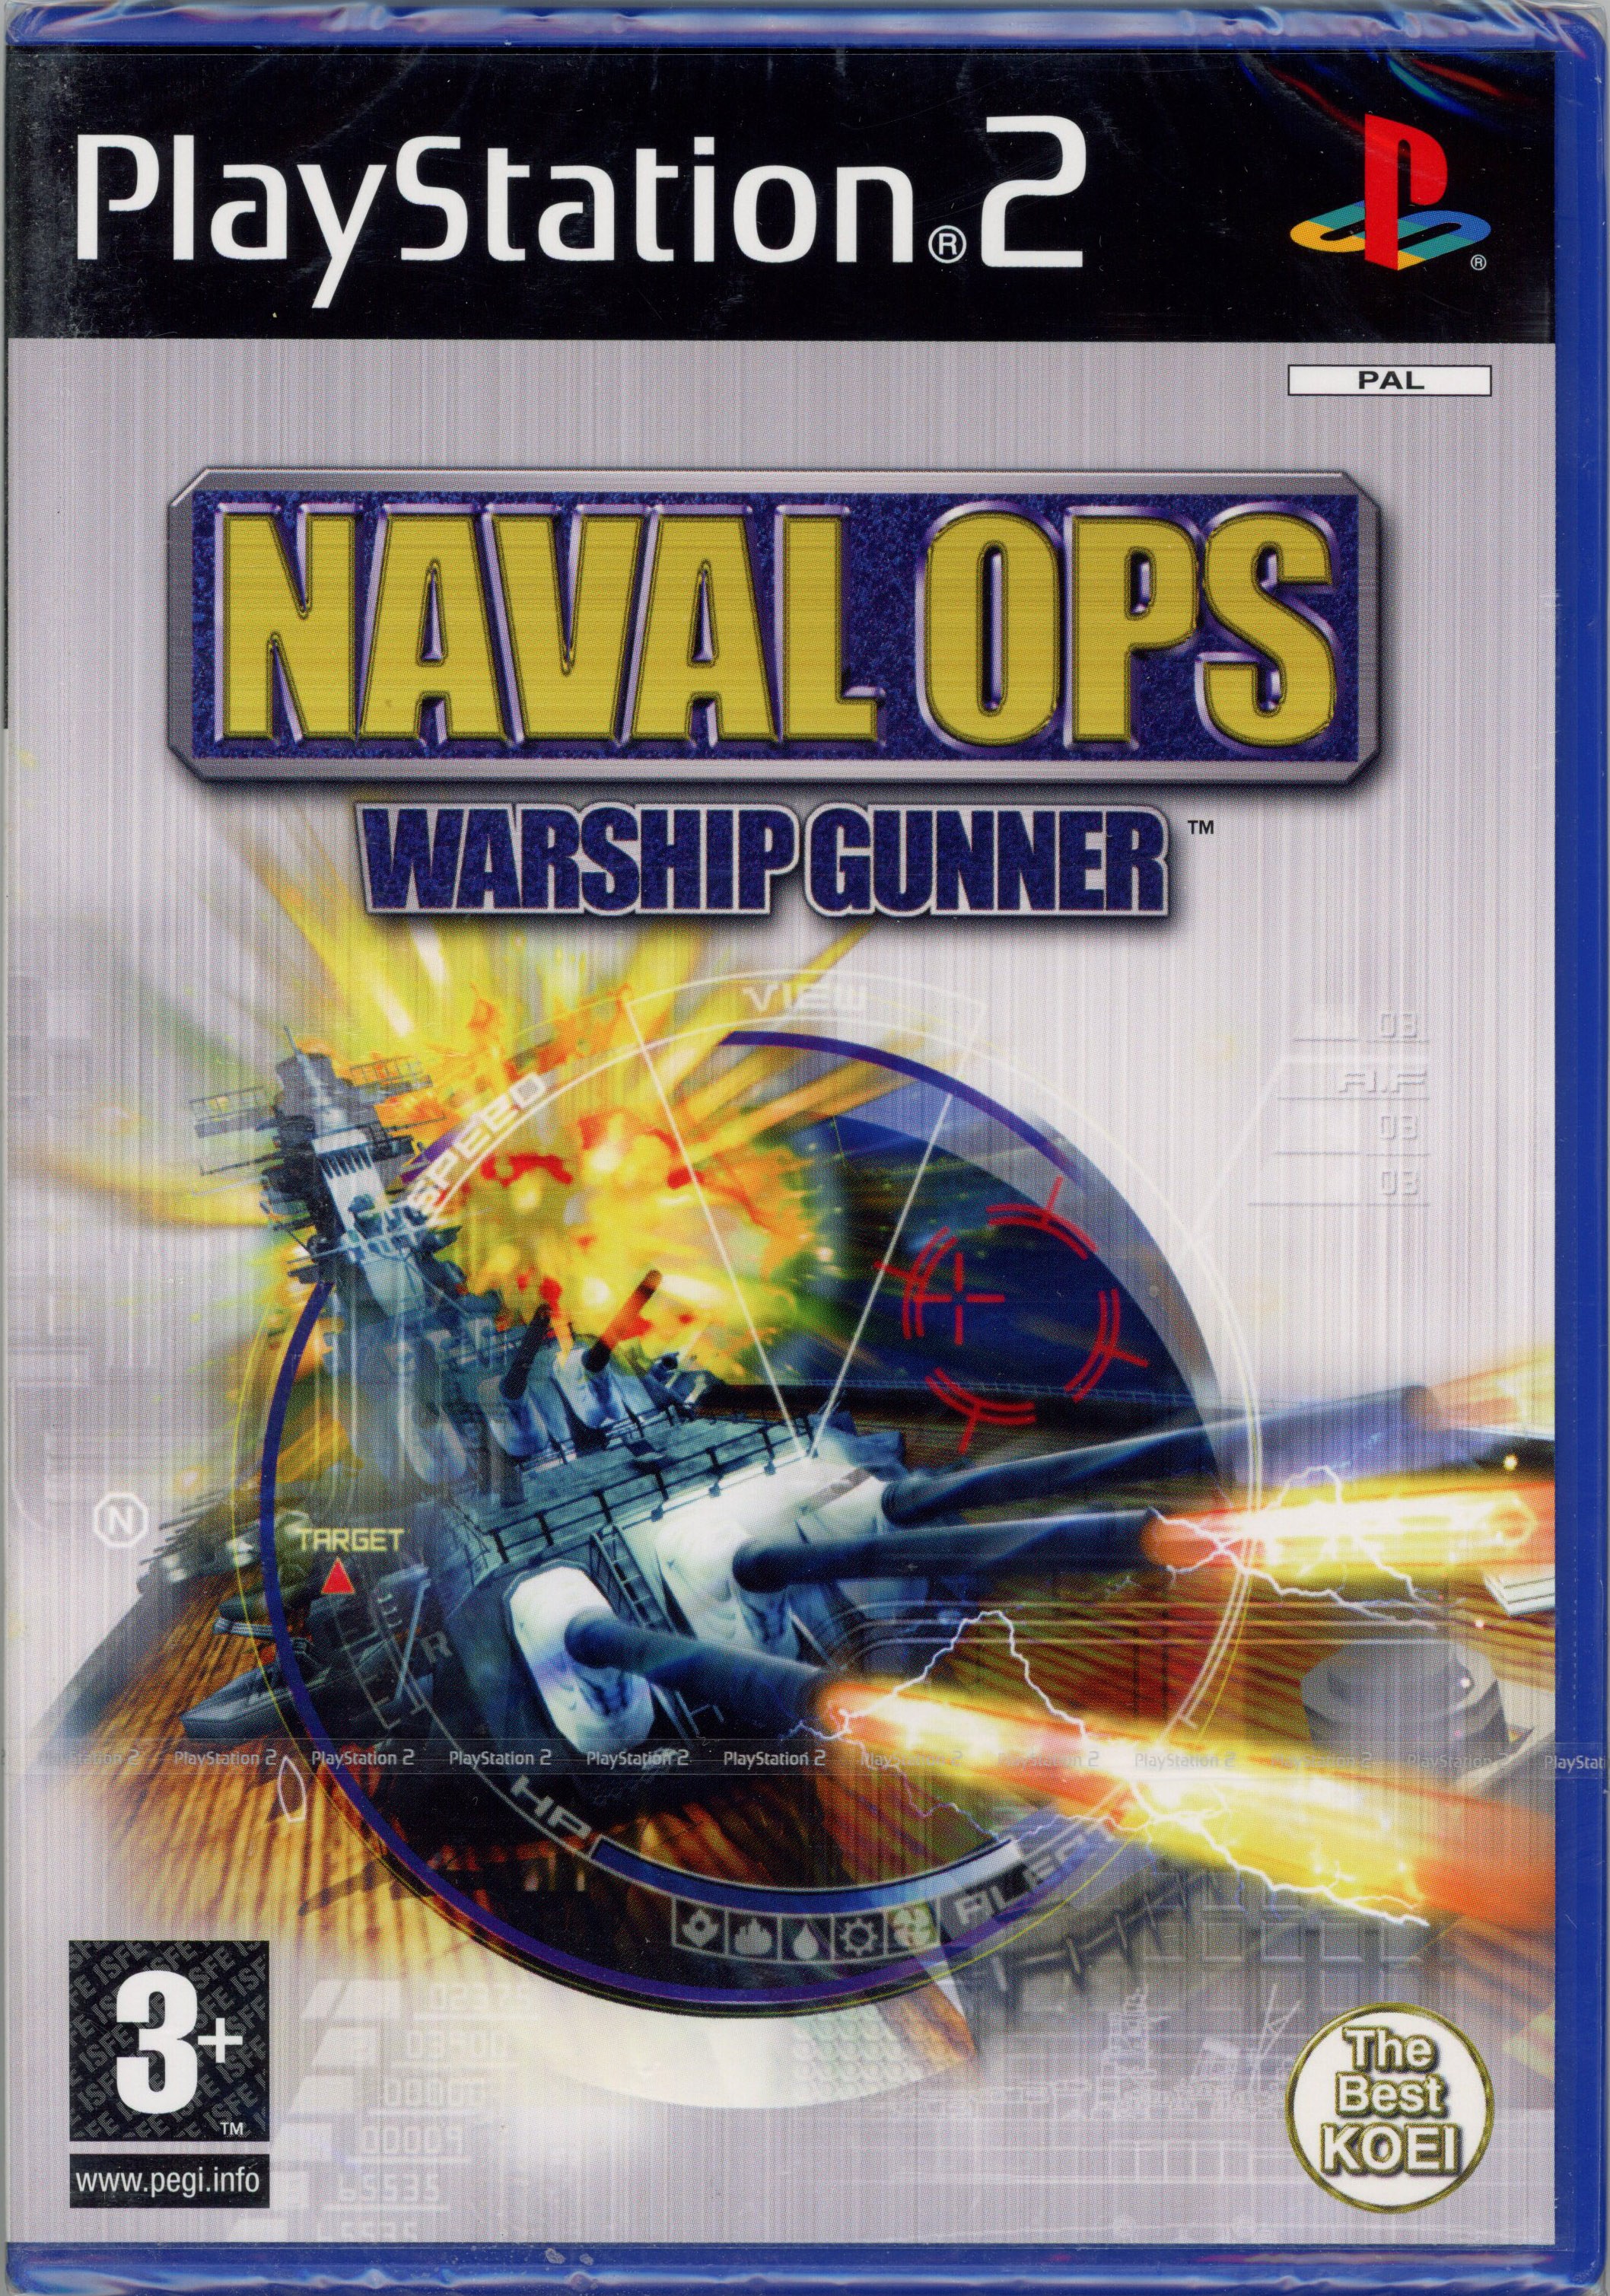 Sony - Naval Ops: Warship Gunner - PlayStation 2 - Factory Sealed